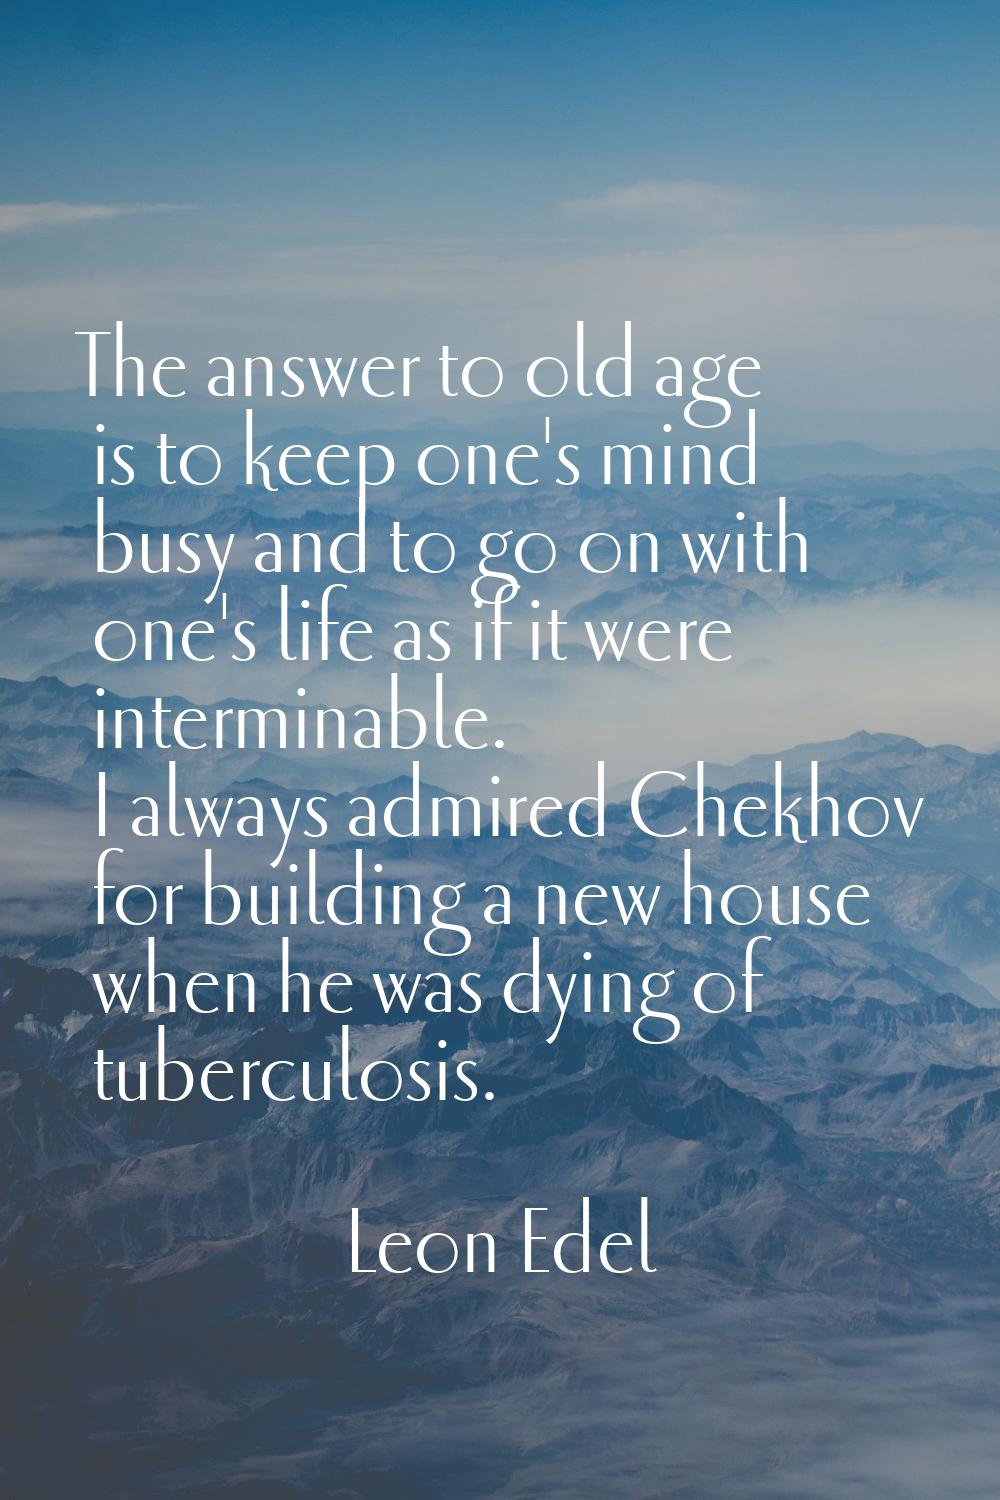 The answer to old age is to keep one's mind busy and to go on with one's life as if it were intermi